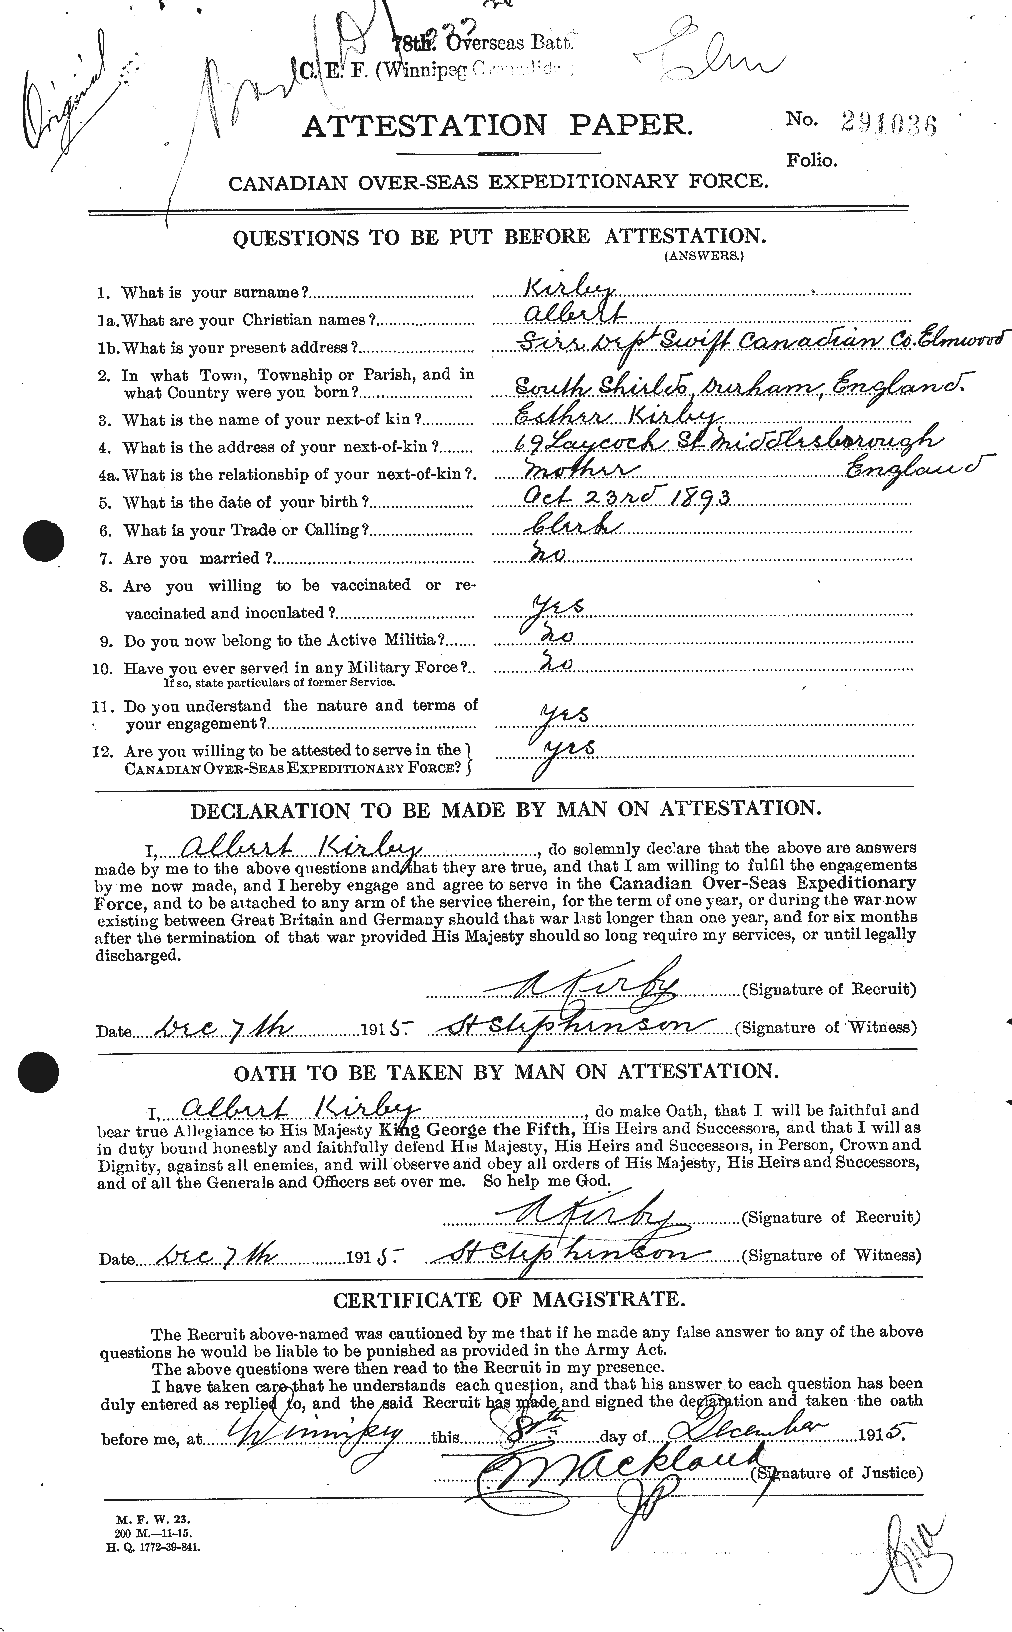 Personnel Records of the First World War - CEF 437145a